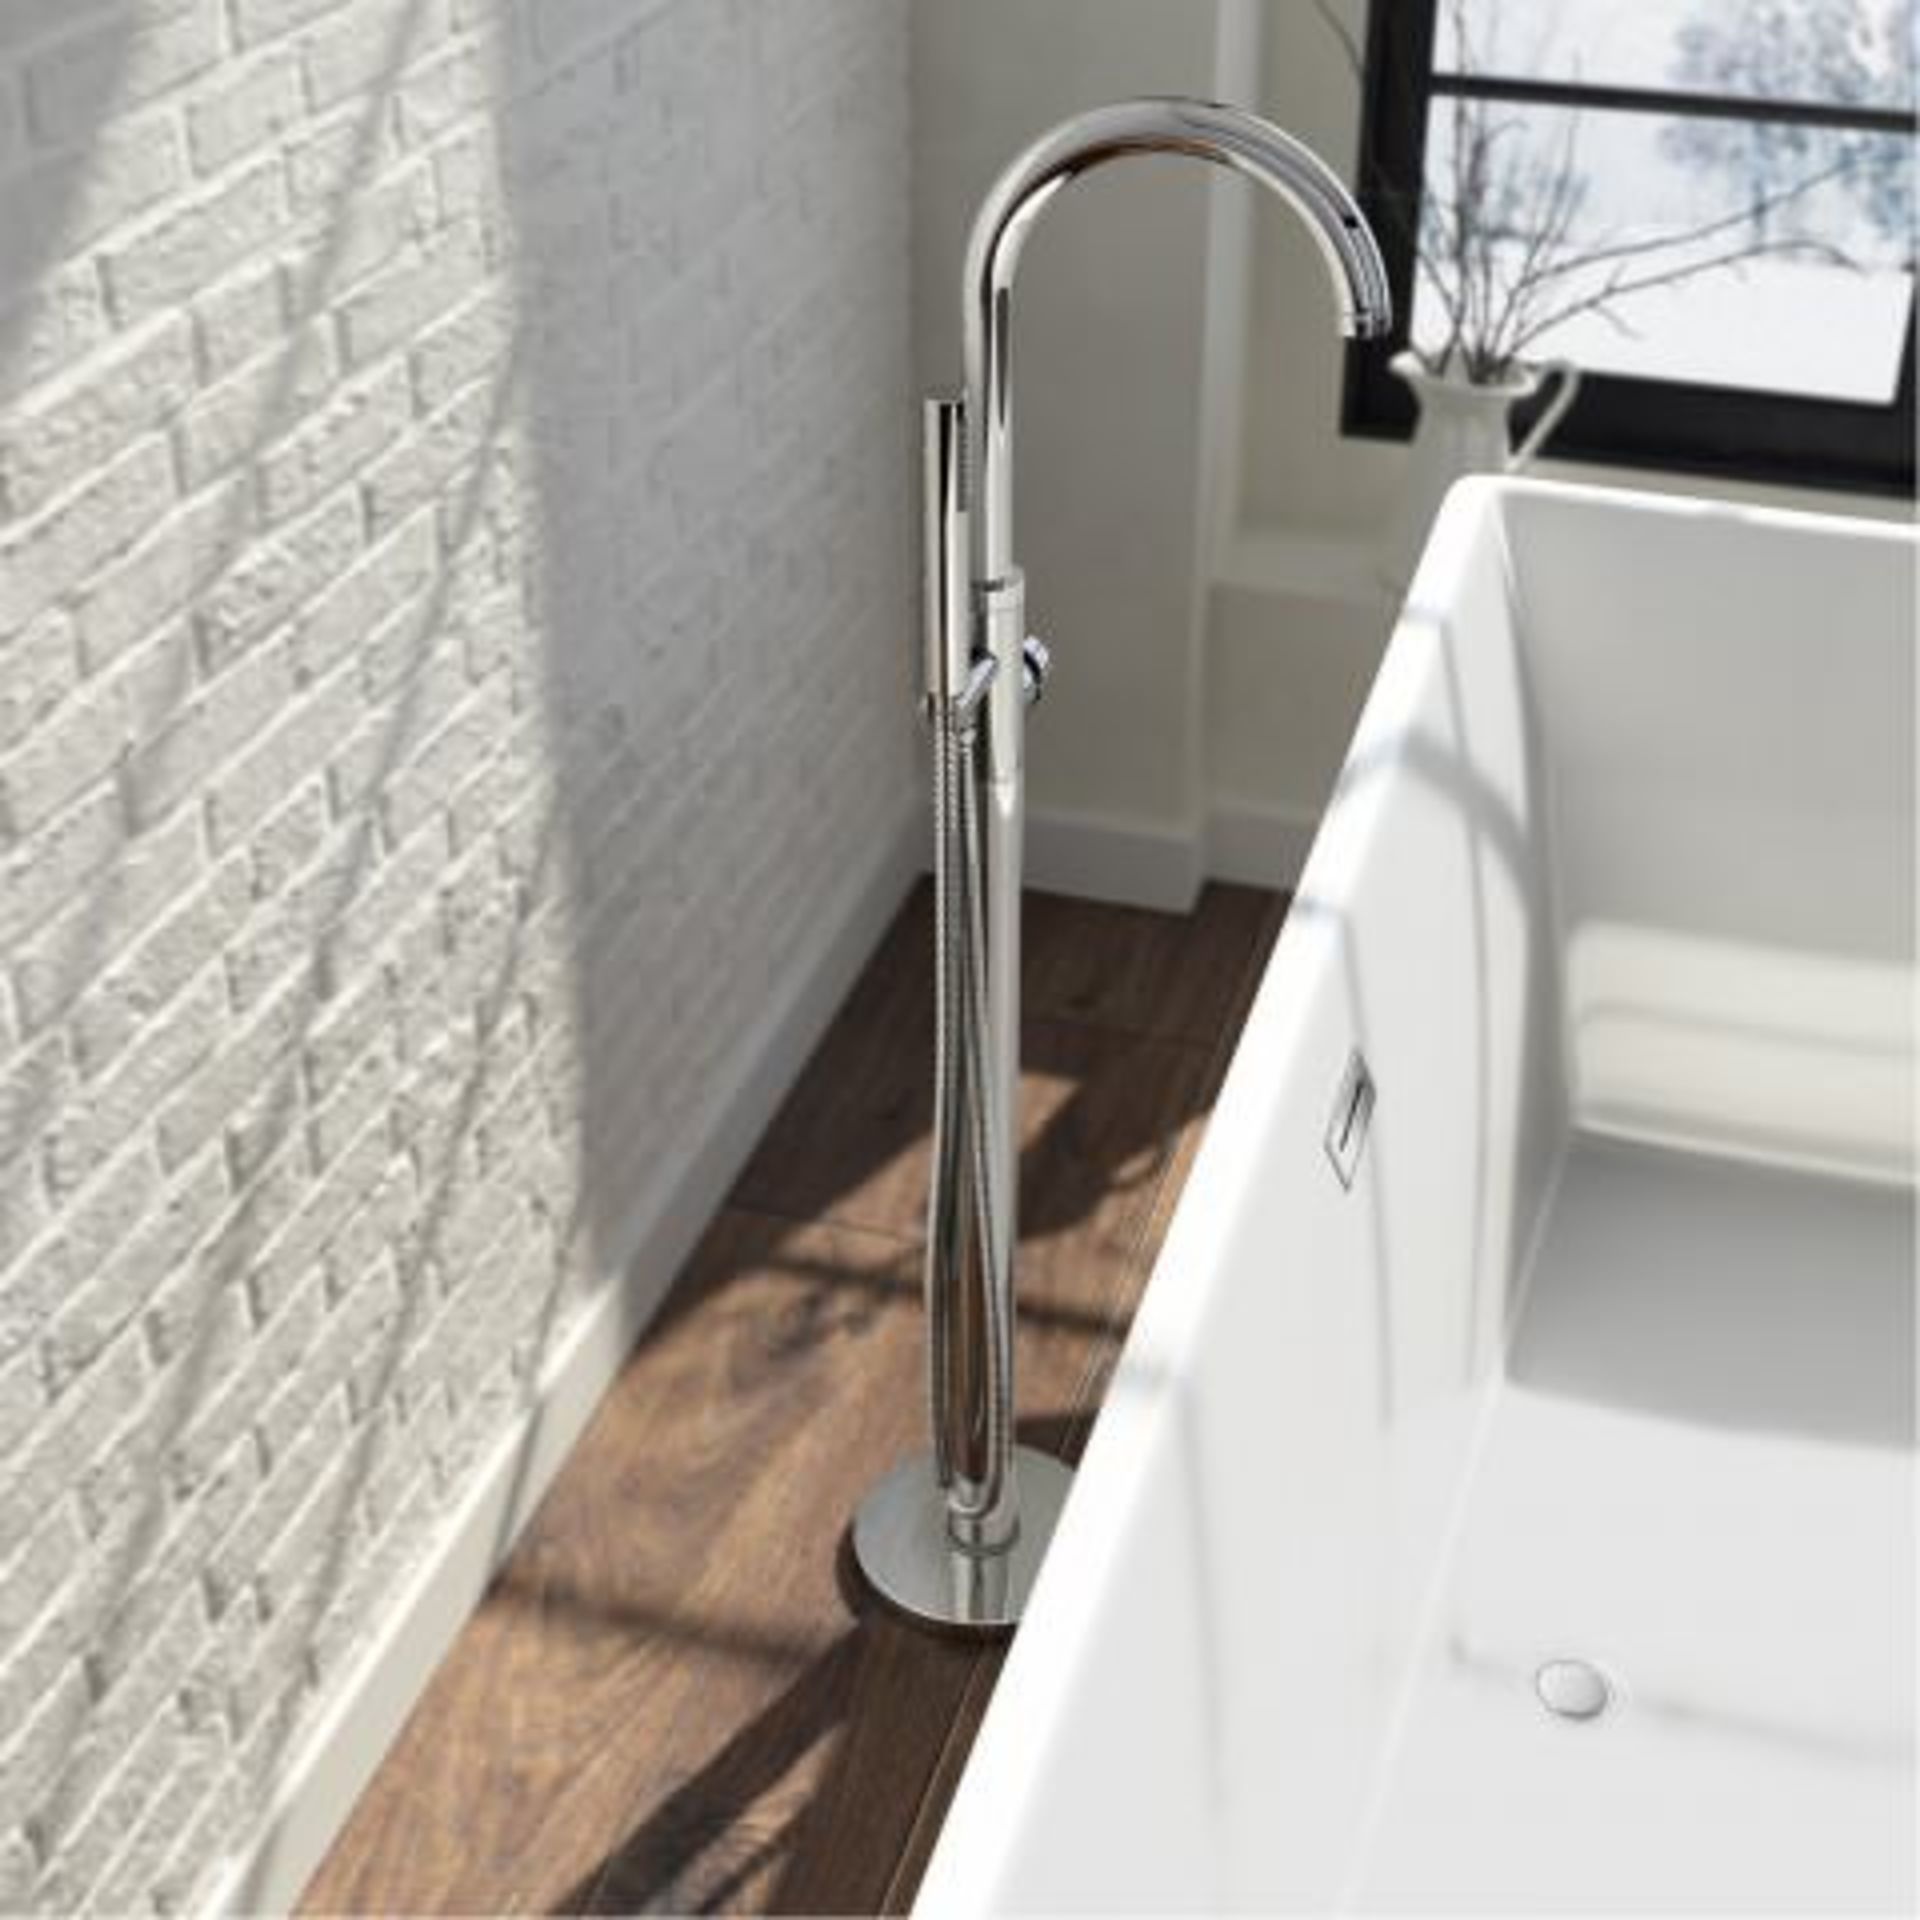 (A3) Gladstone II Freestanding Bath Mixer Tap with Hand Held Shower Head Simplicity at its best: Our - Image 3 of 5